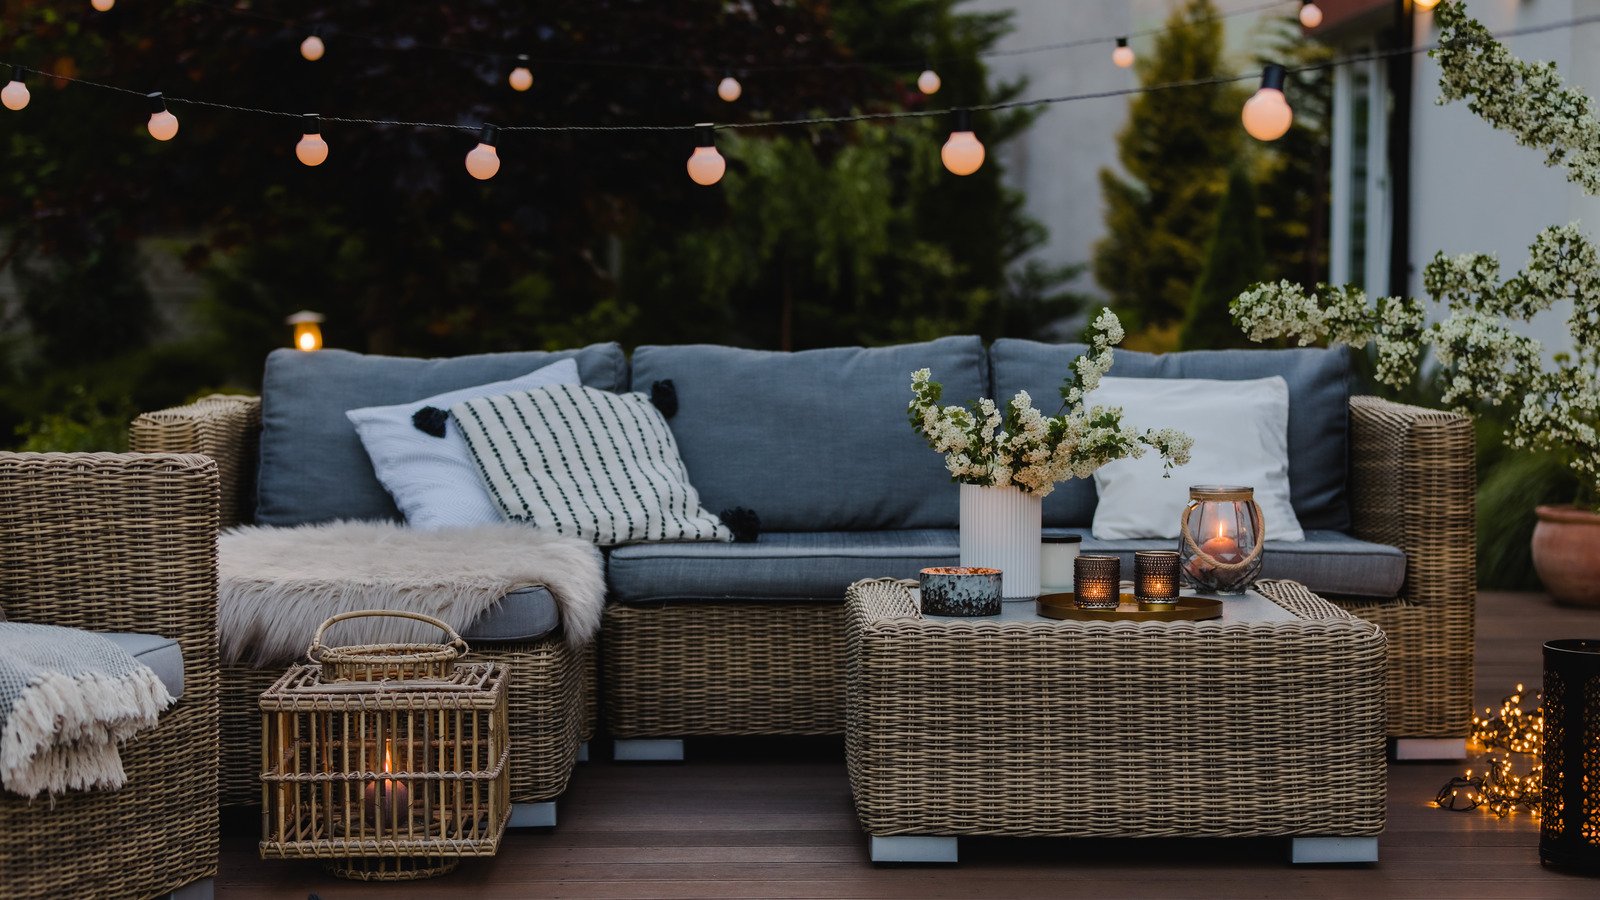 Deck Decorating Ideas with Lanterns and candles